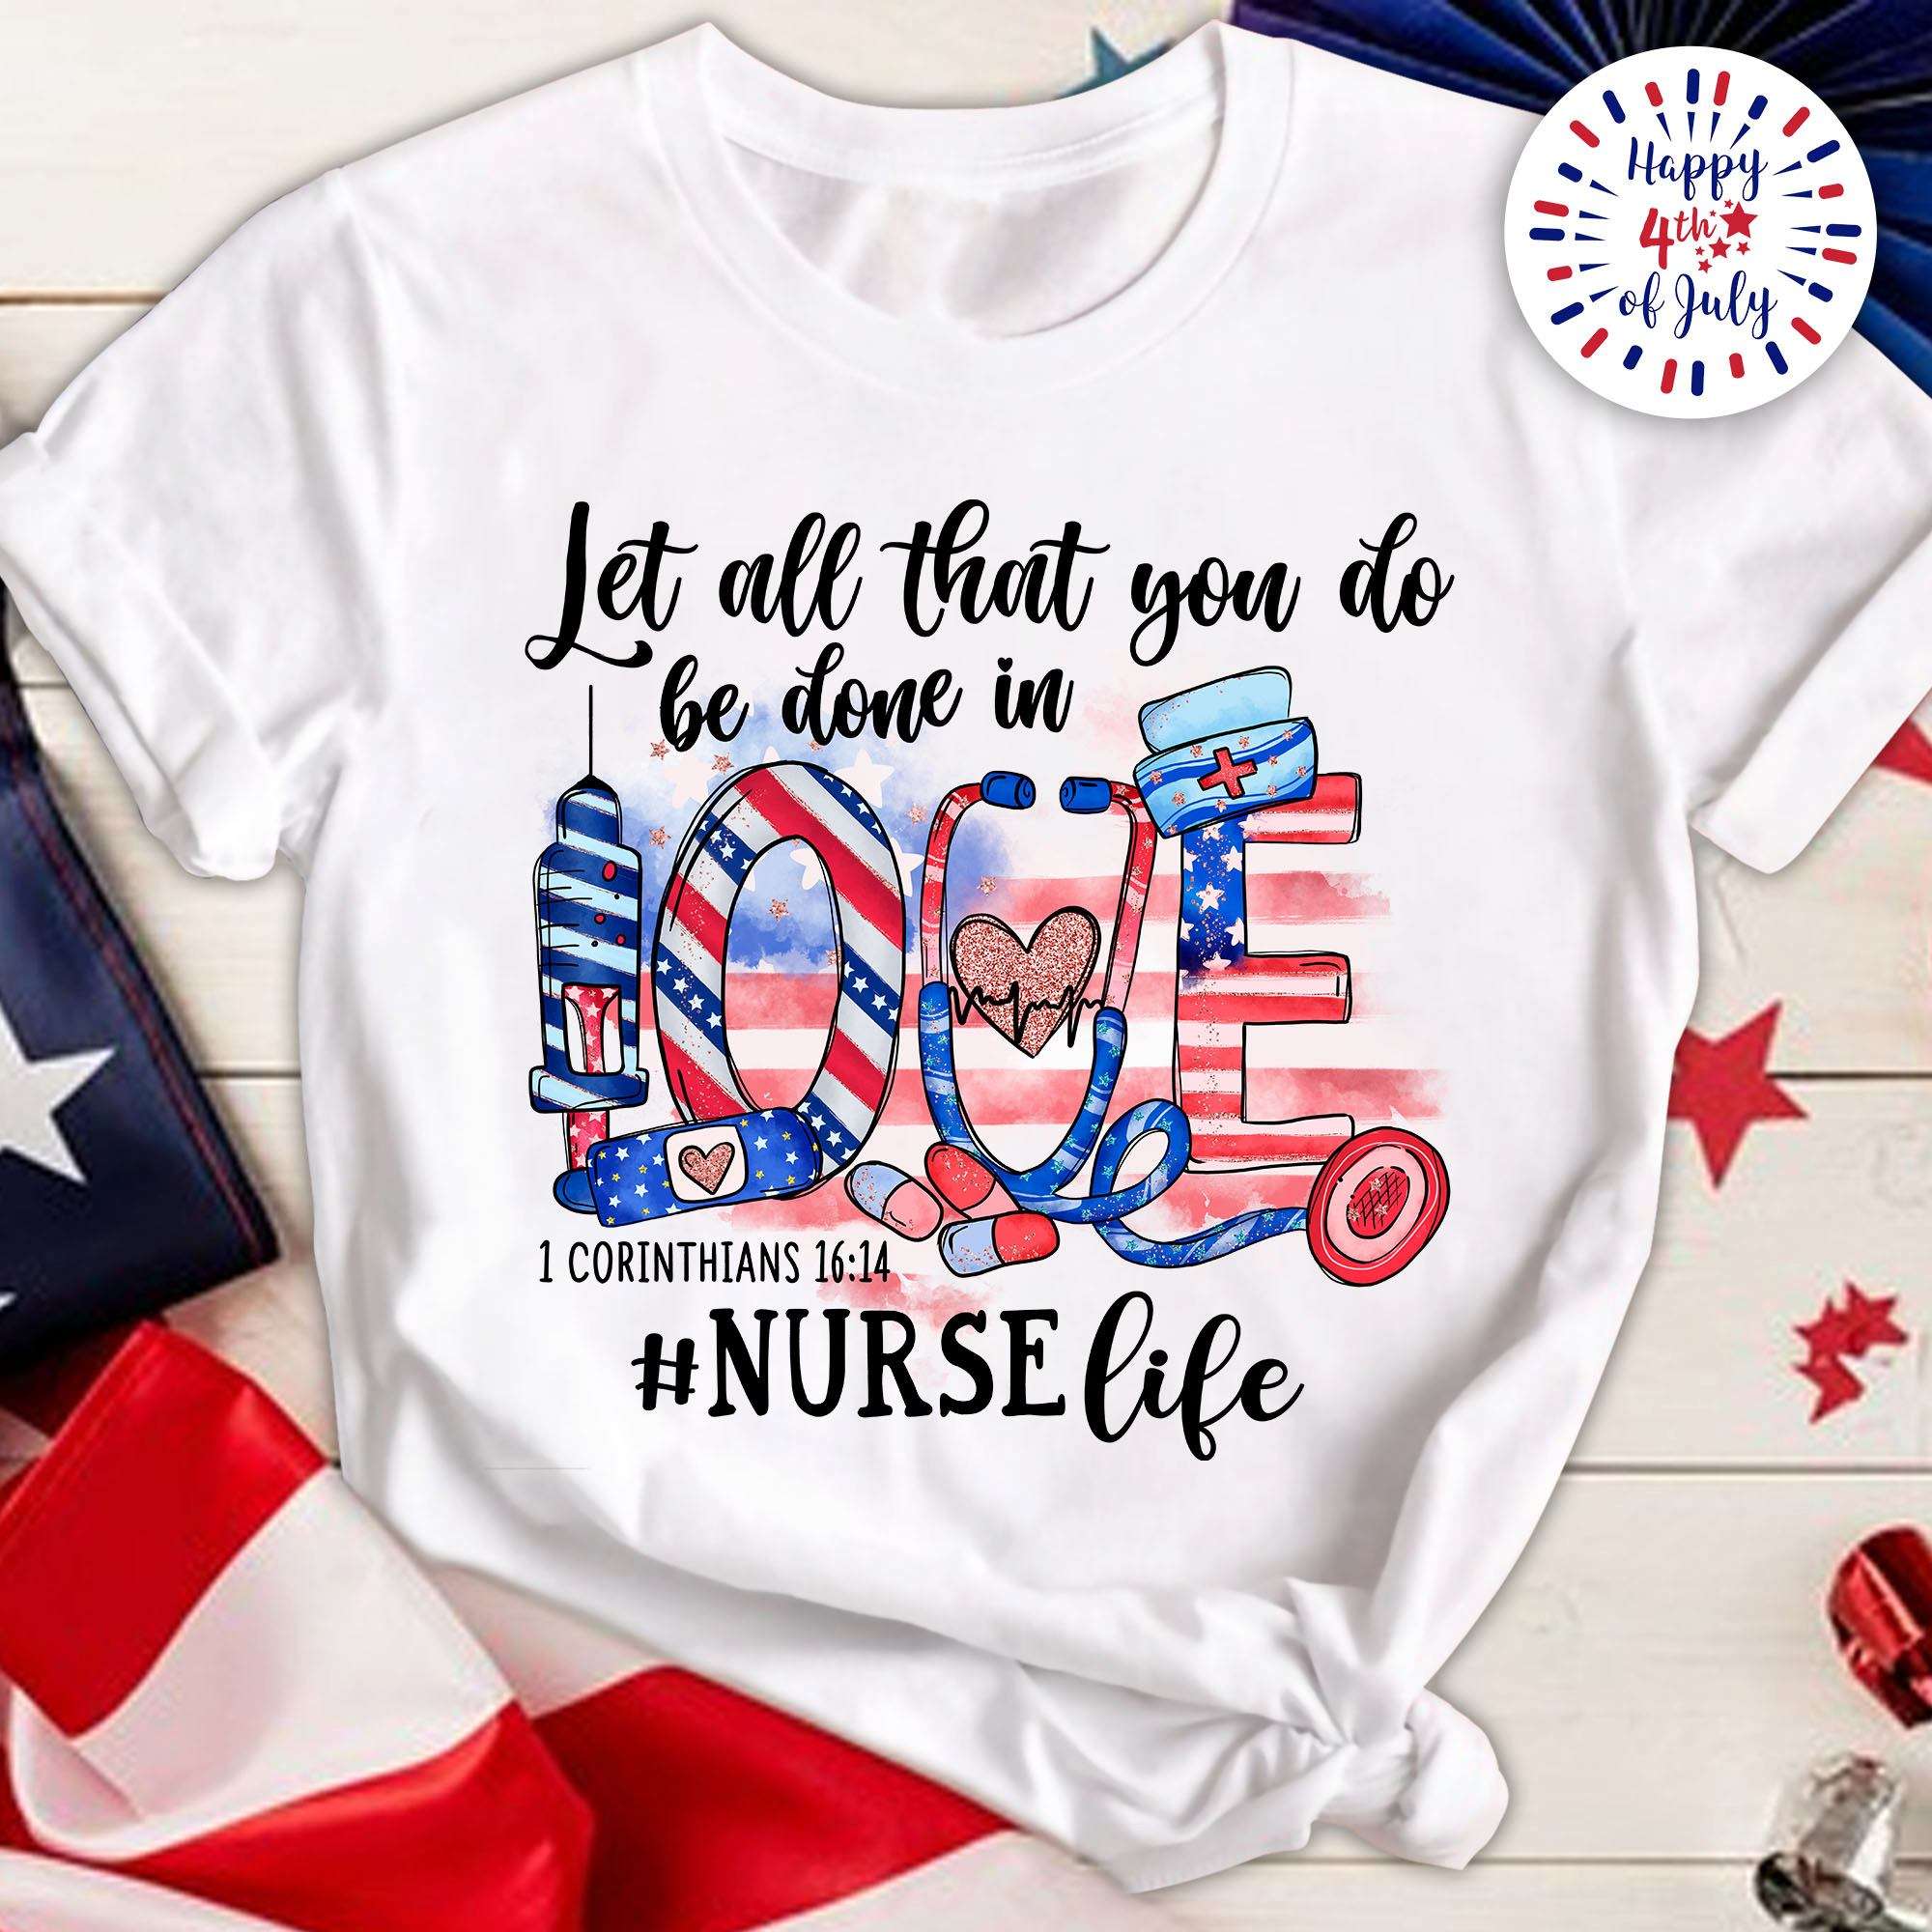 Let all that you do be done in Love - Nurse life, American nursing job